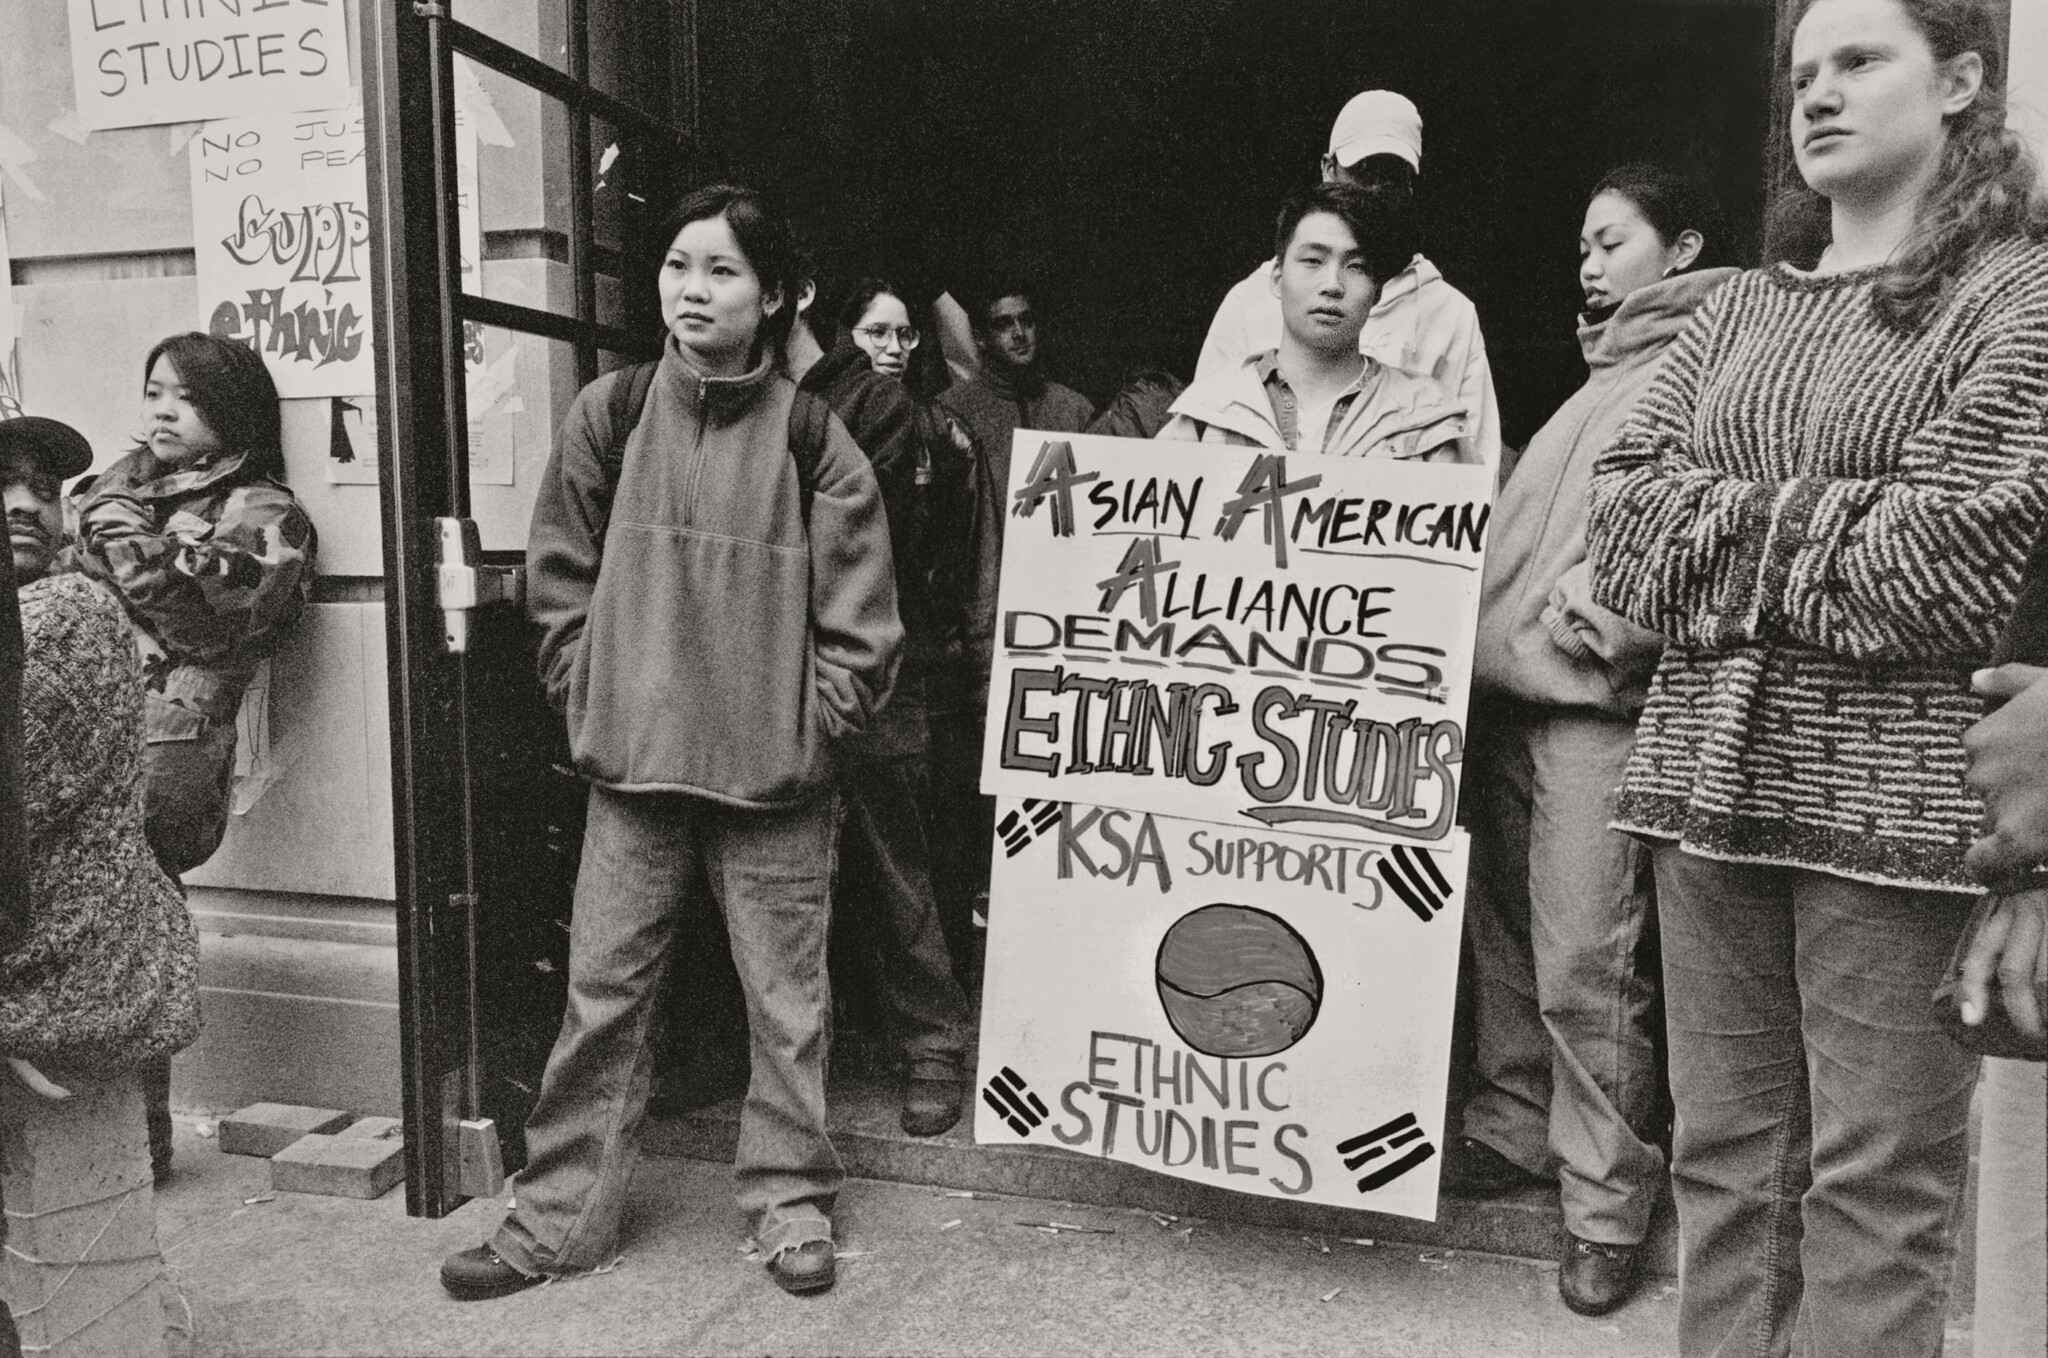 A young Asian Man holds signs demanding ethnic studies, surrounded by other young people of different races.